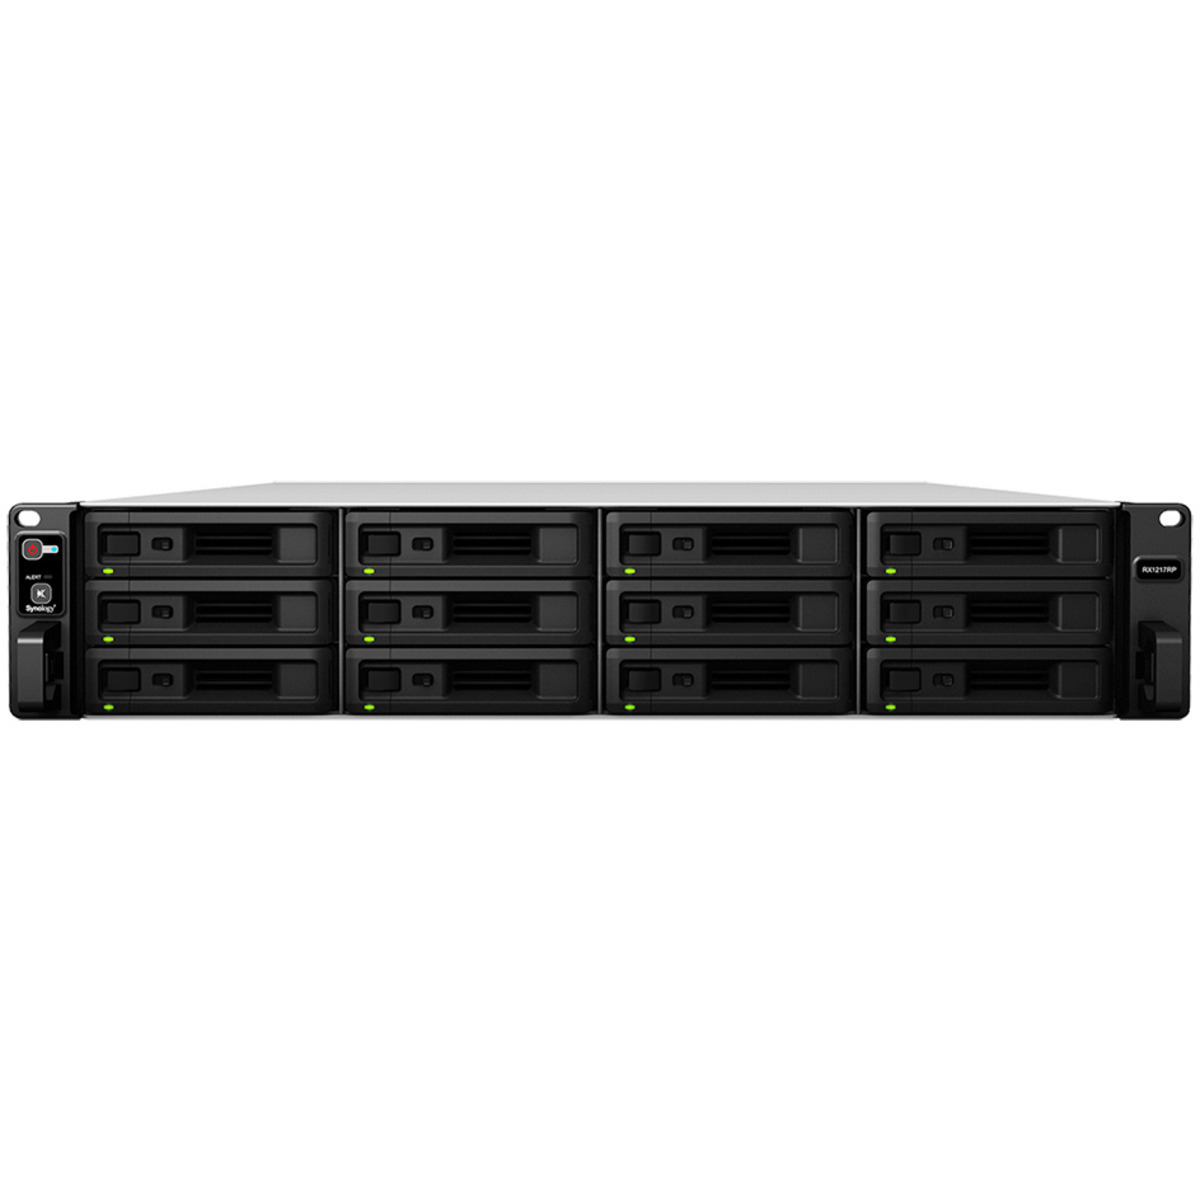 buy $5376 Synology RX1217RP 96tb RackMount Expansion Enclosure 12x8000gb Western Digital Ultrastar DC HC320 HUS728T8TALE6L4 3.5 7200rpm SATA 6Gb/s HDD ENTERPRISE Class Drives Installed - Burn-In Tested - nas headquarters buy network attached storage server device das new raid-5 free shipping usa christmas new year holiday sale RX1217RP